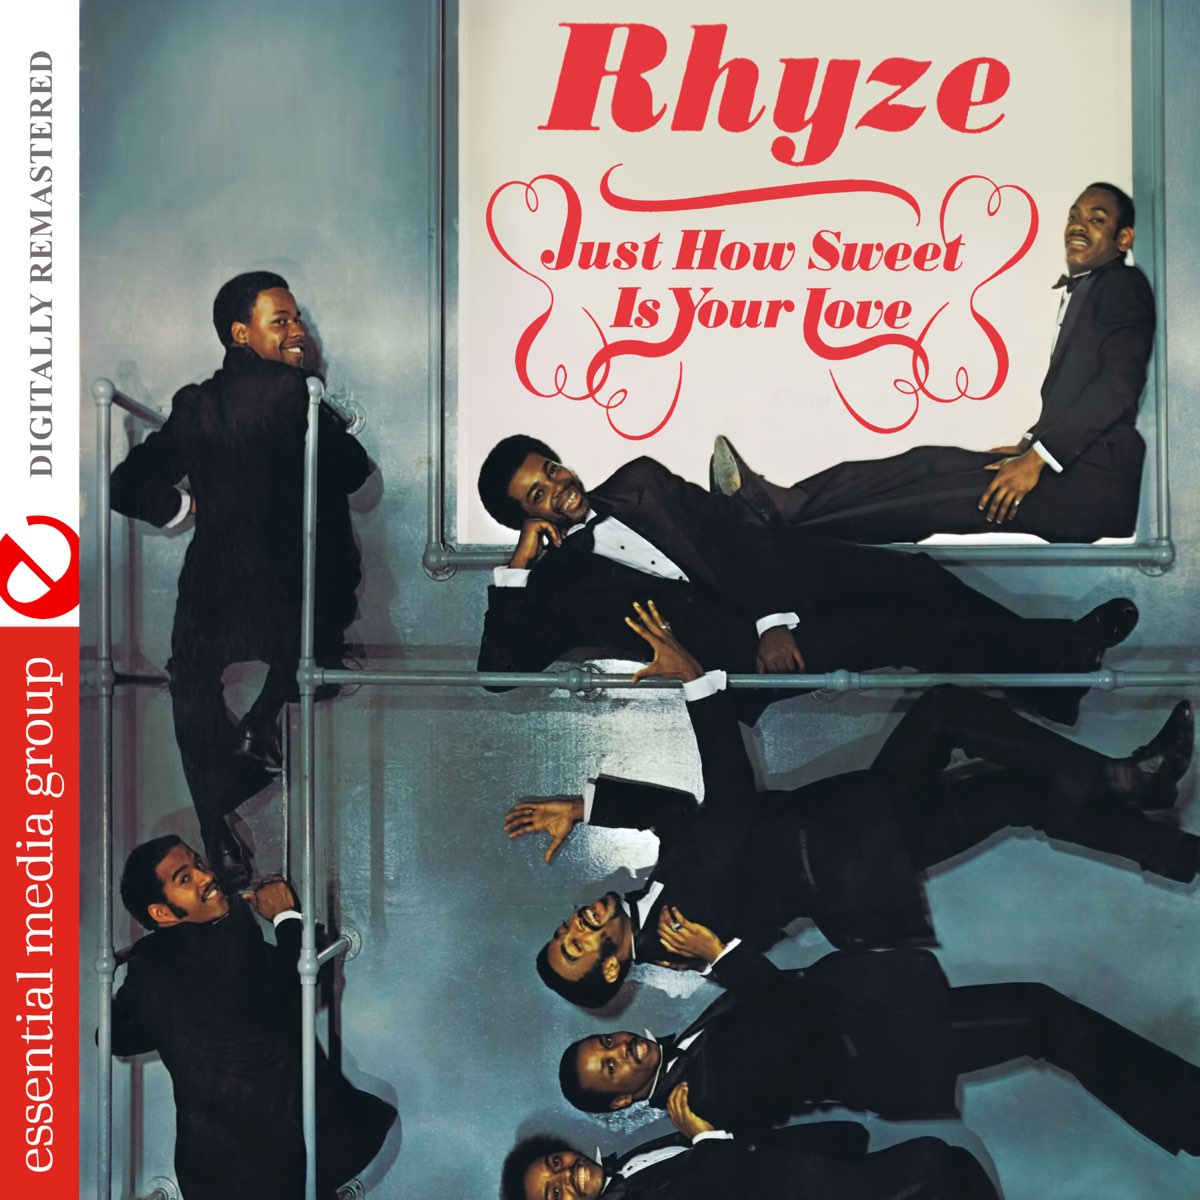 Do your dance. Rhyze - just how Sweet is your Love. Rhyze. Your Love (Remastered). Just r музыка.